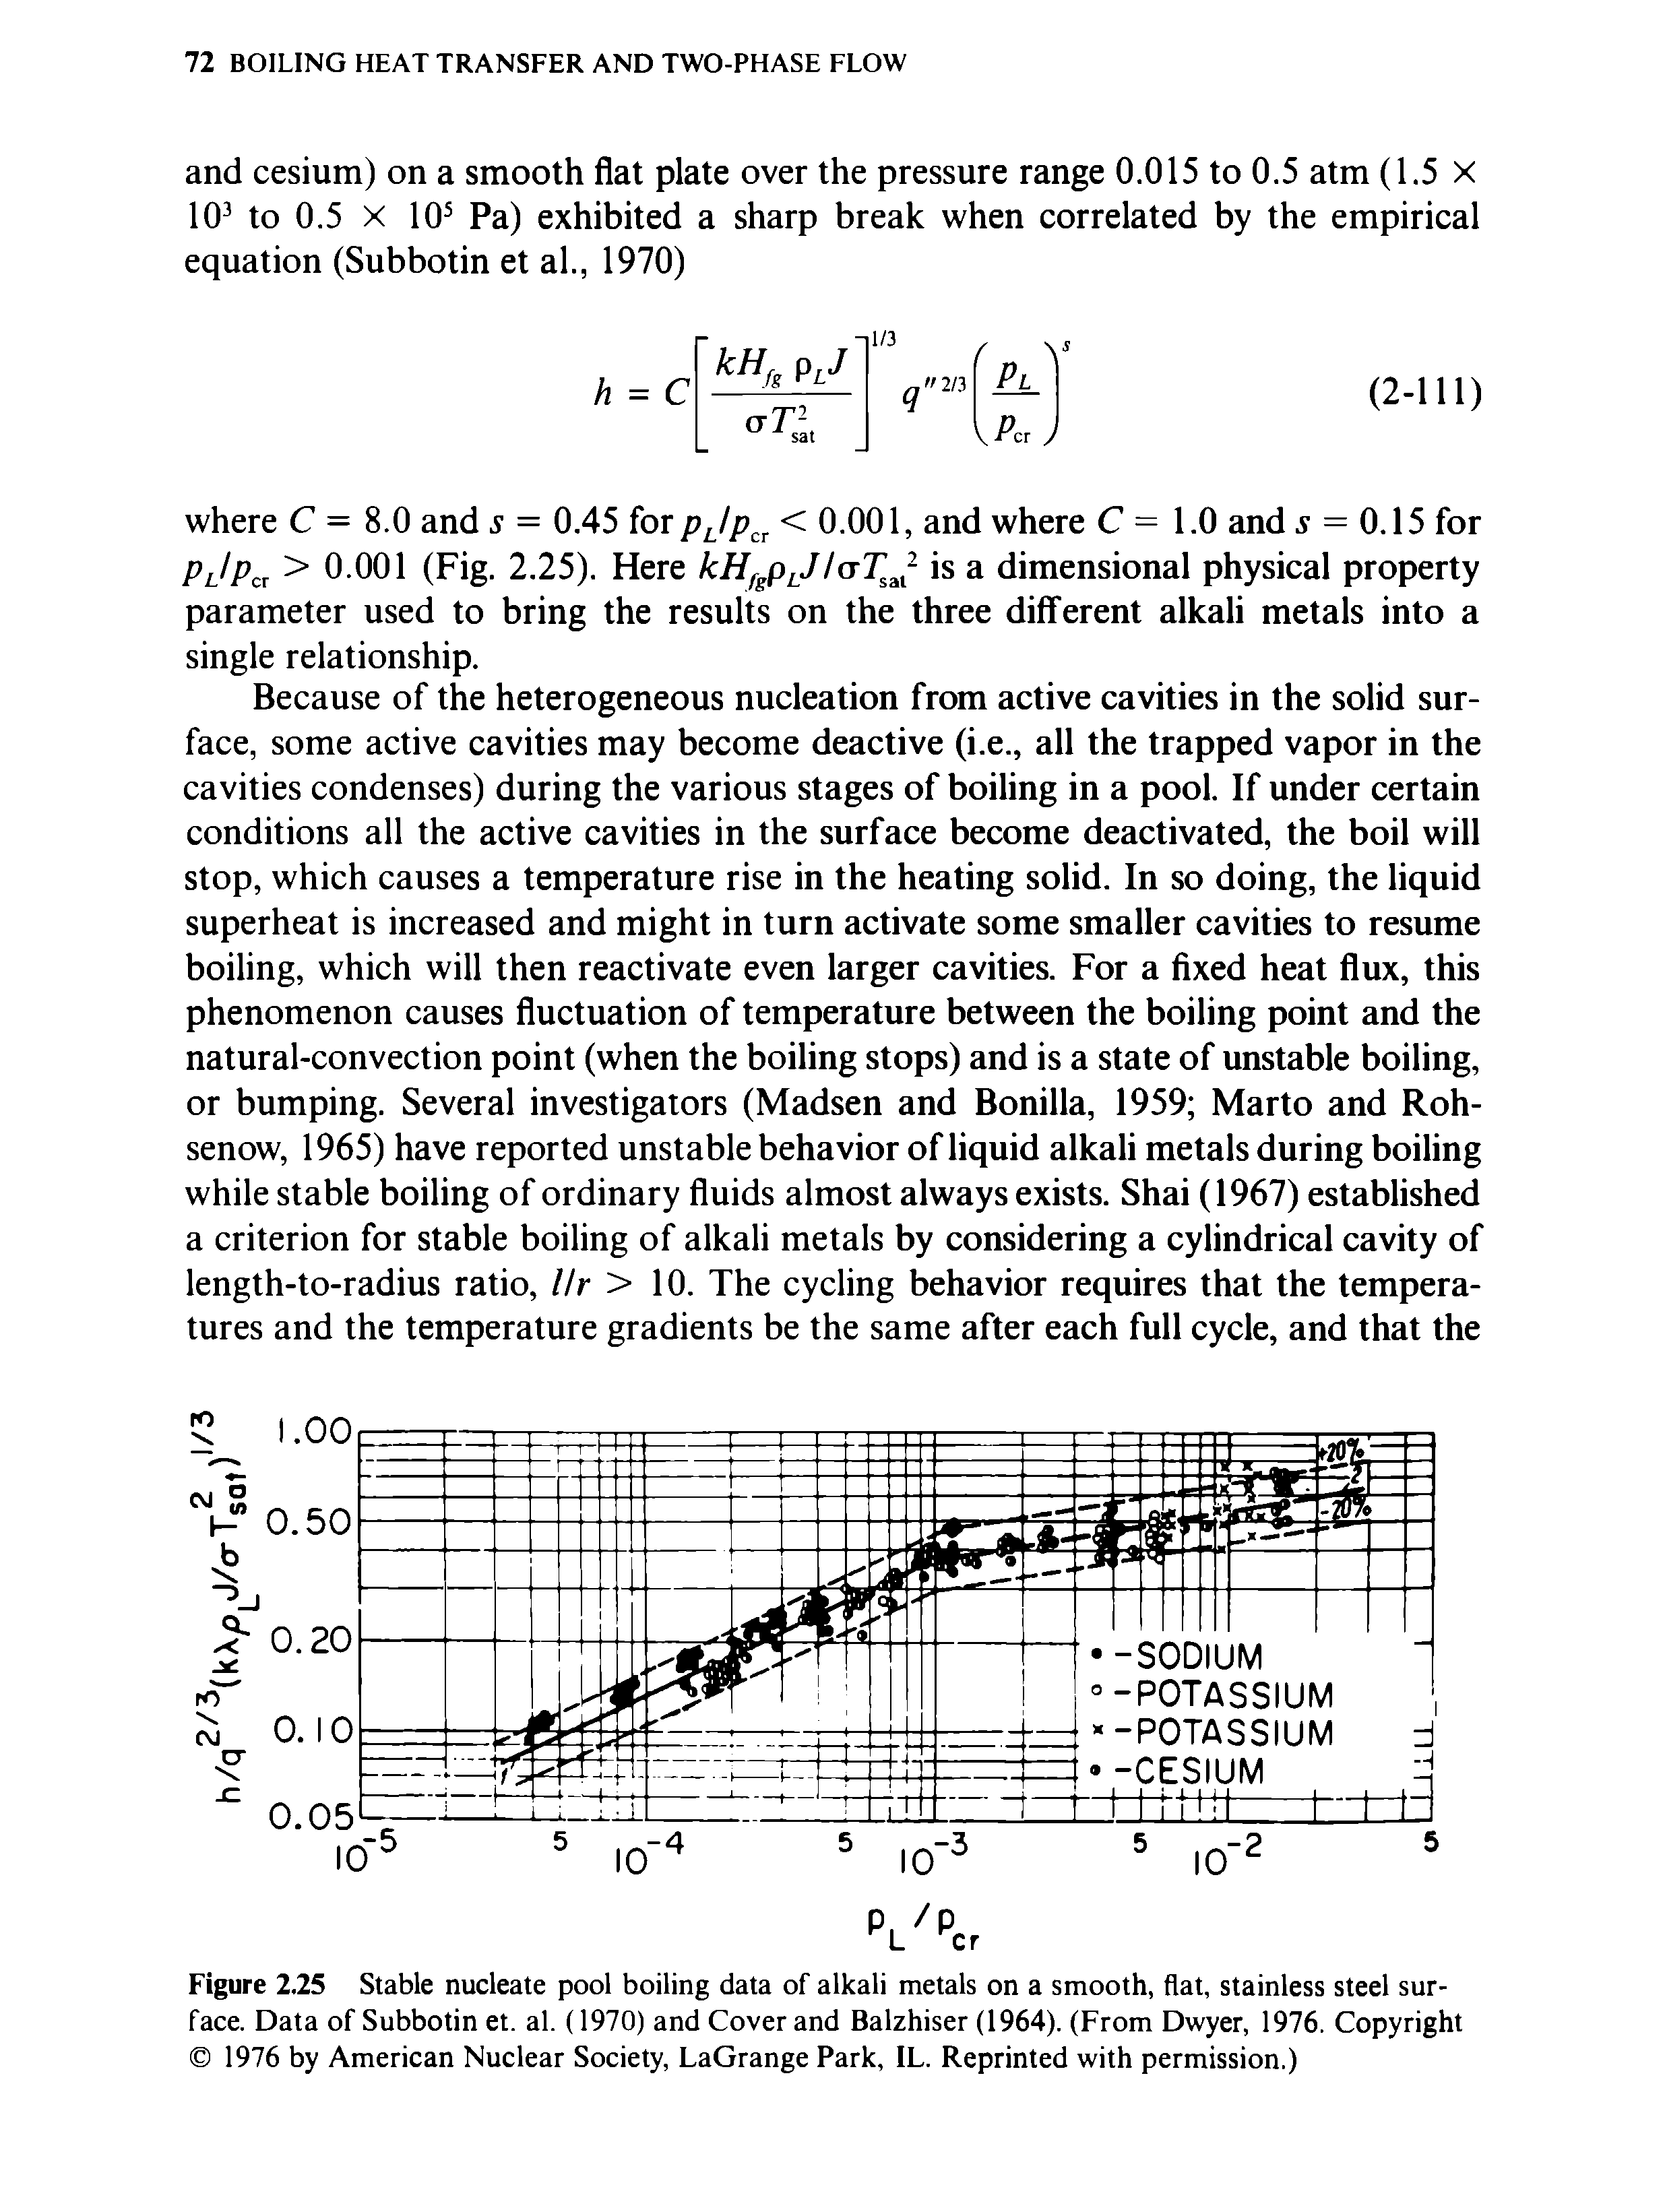 Figure 2.25 Stable nucleate pool boiling data of alkali metals on a smooth, flat, stainless steel surface. Data of Subbotin et. al. (1970) and Cover and Balzhiser (1964). (From Dwyer, 1976. Copyright 1976 by American Nuclear Society, LaGrange Park, IL. Reprinted with permission.)...